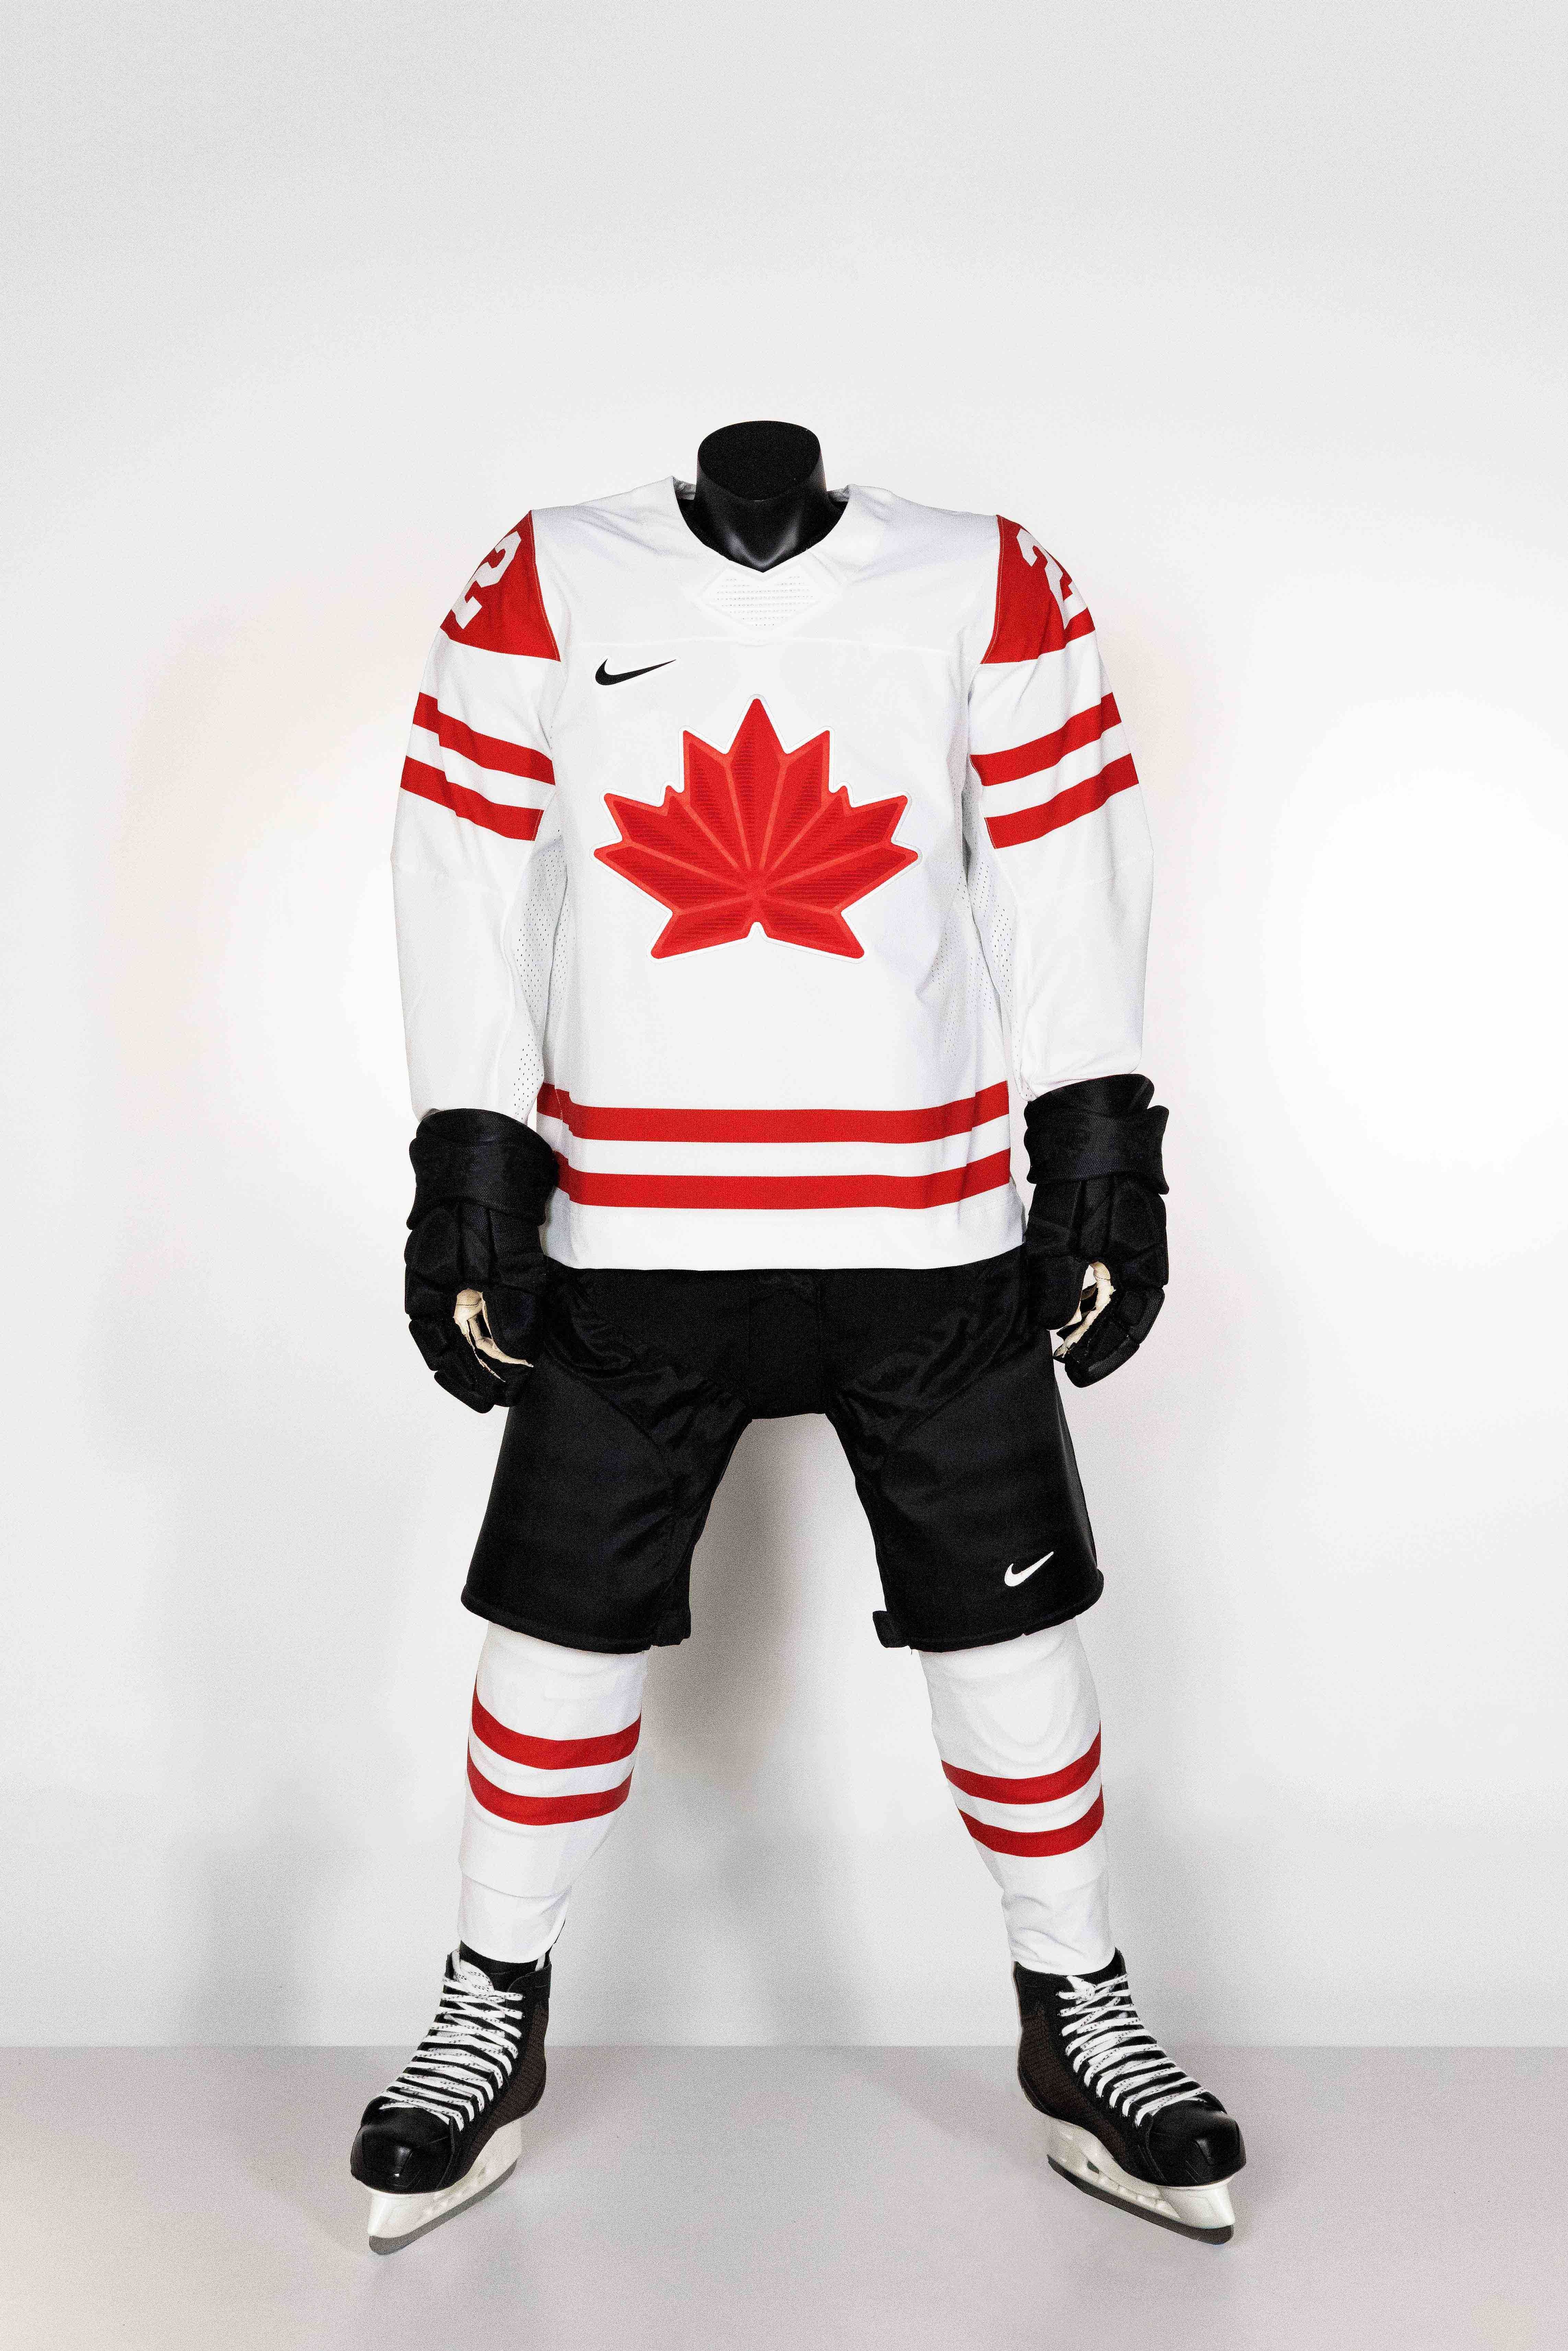 Hockey Canada unveils Olympic jerseys - Red Deer Advocate